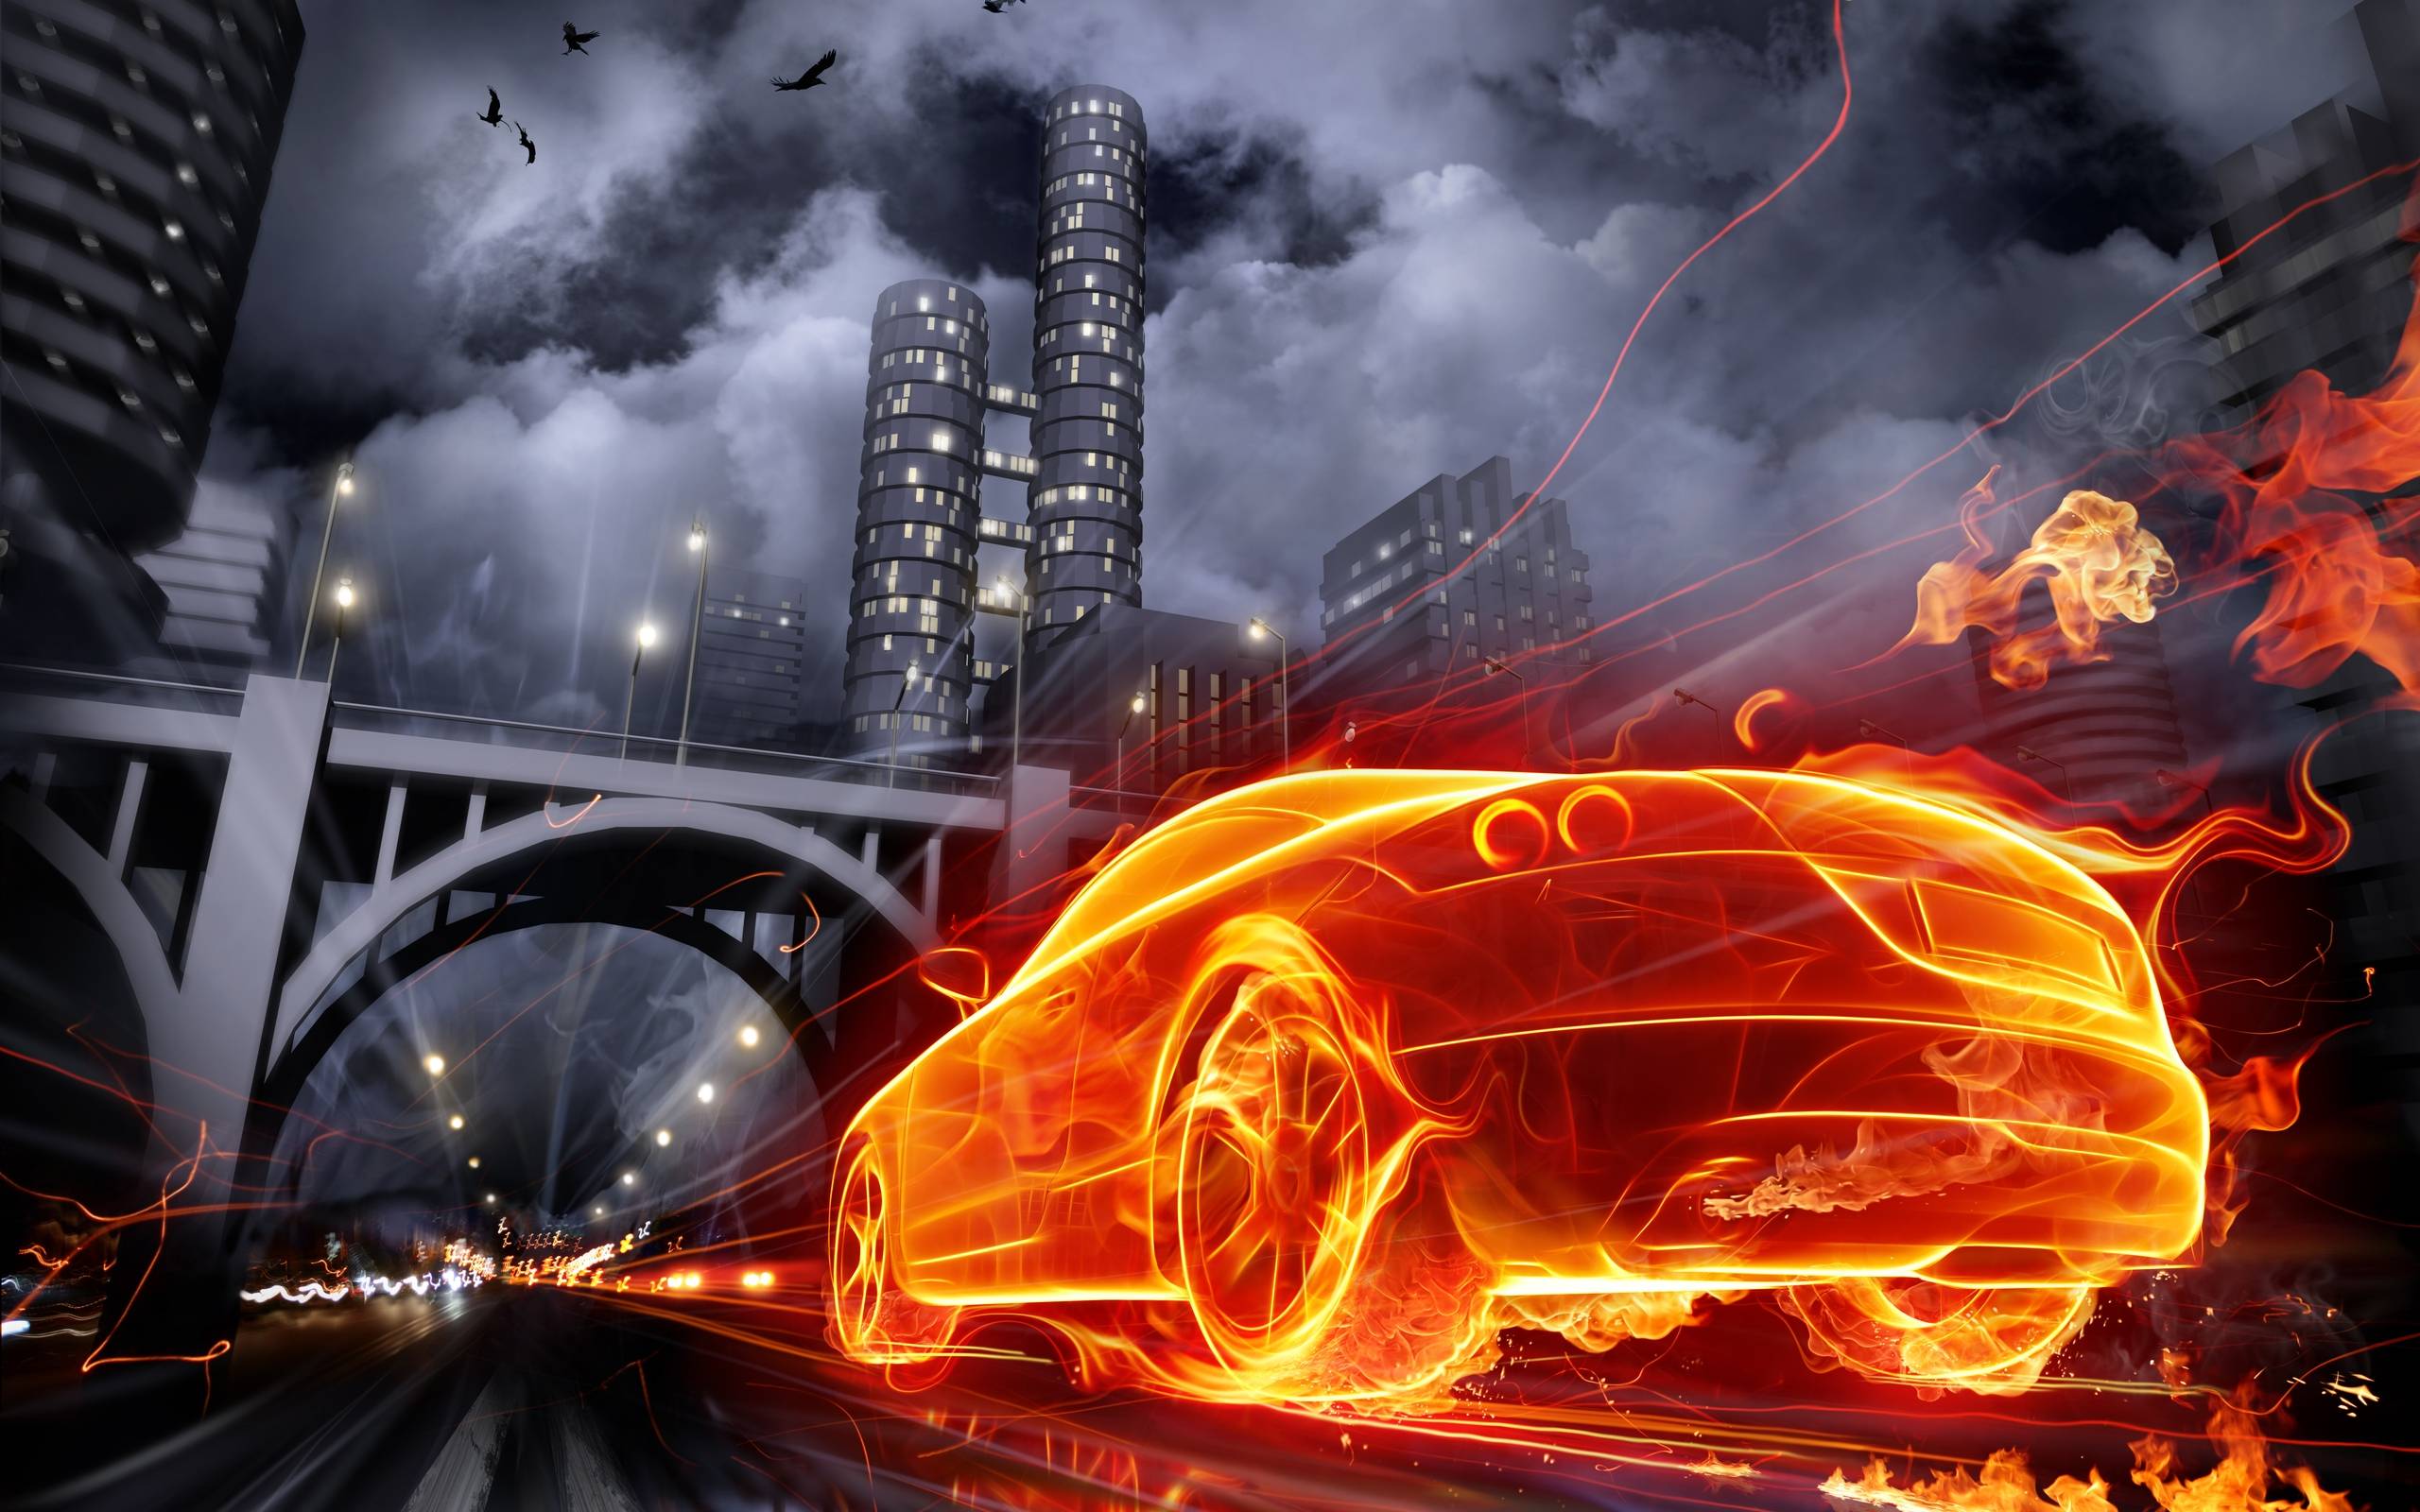 Burning car wallpaper and image, picture, photo